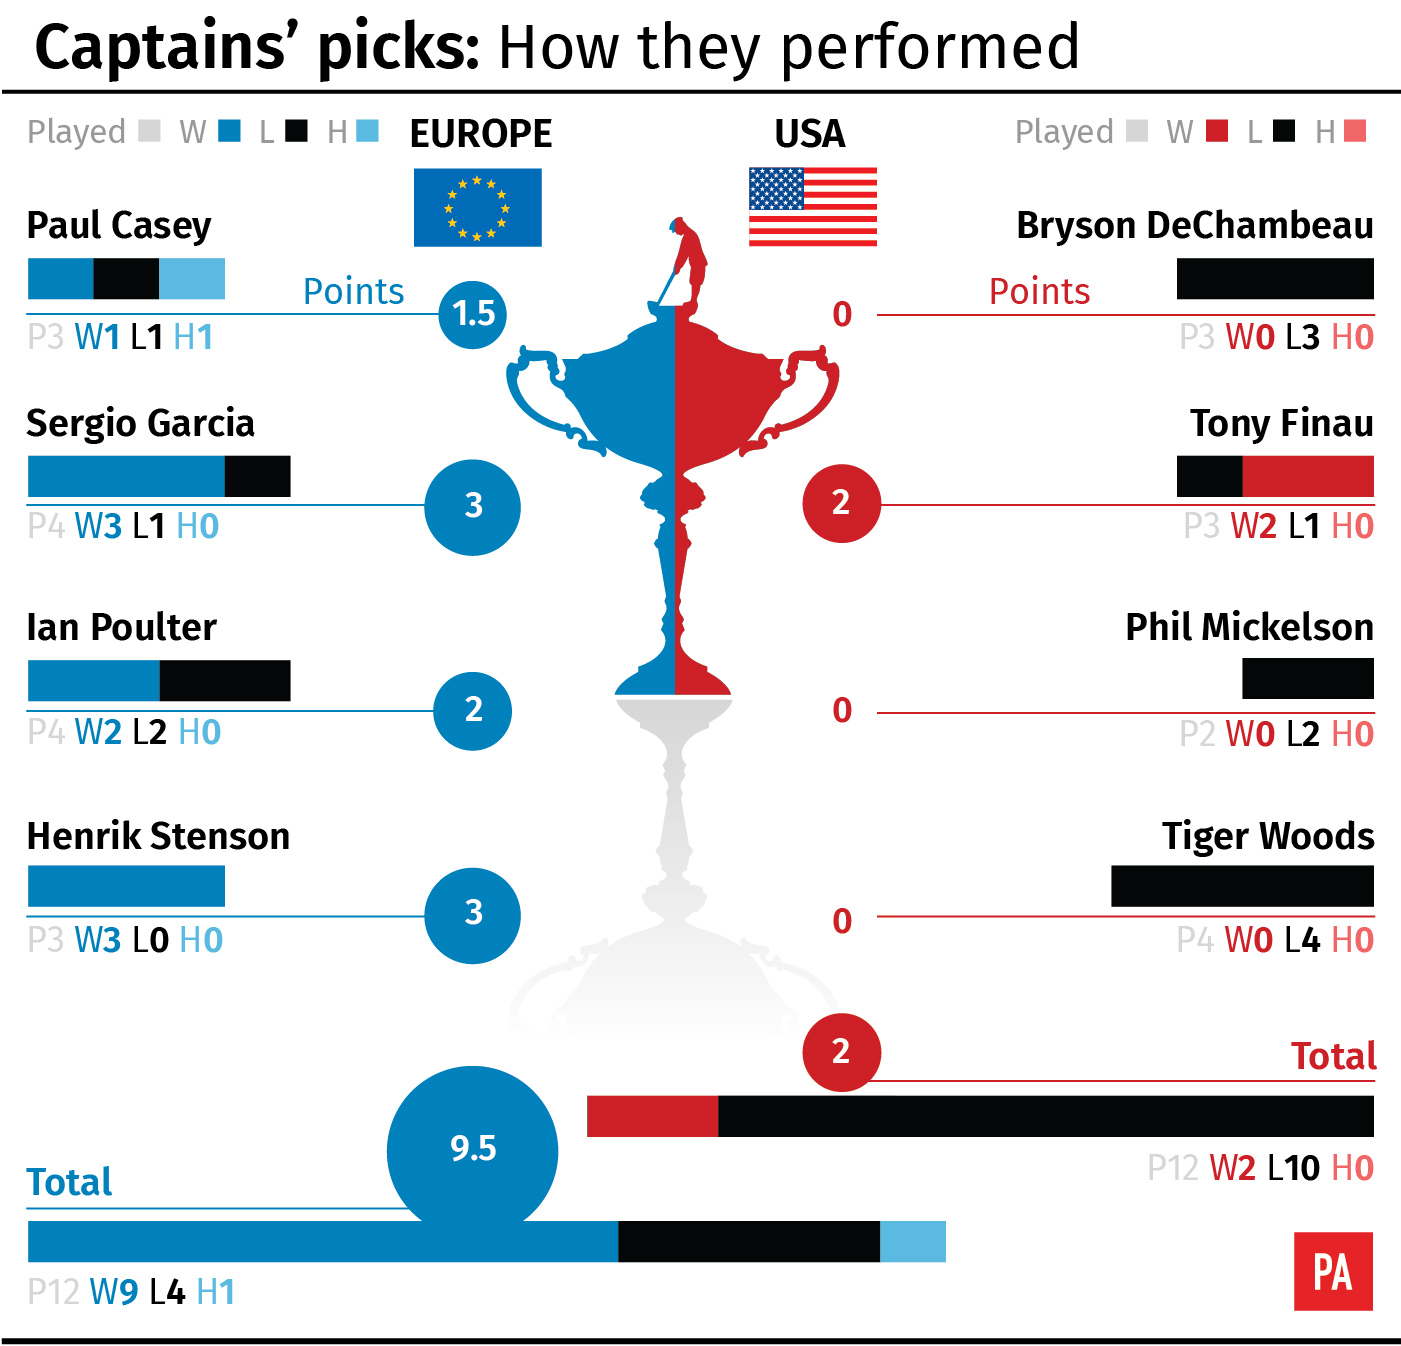 How the captains' picks performed in the Ryder Cup